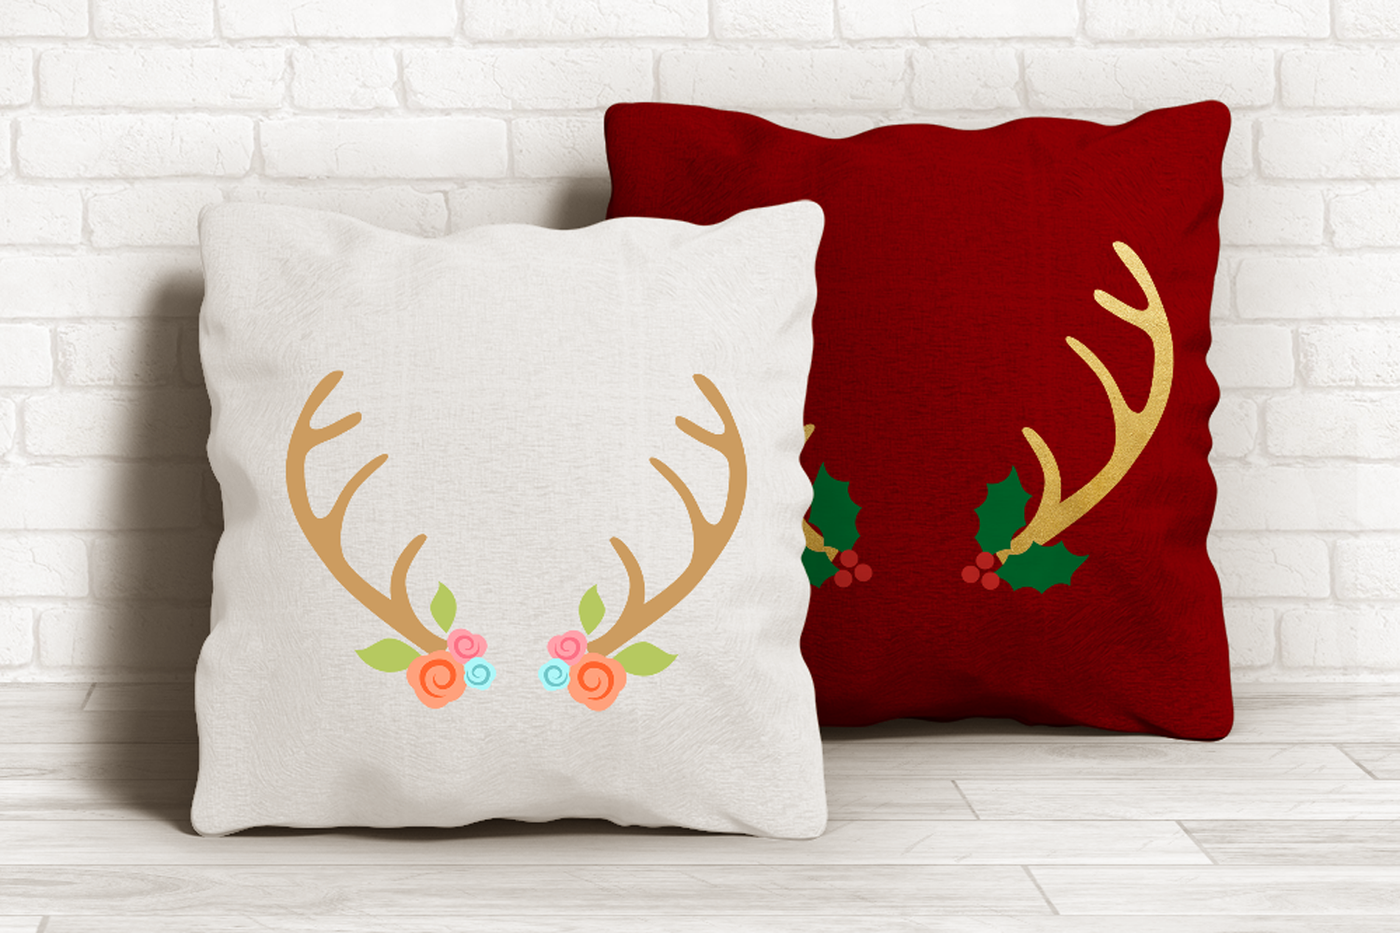 Antler designs with flowers and holly